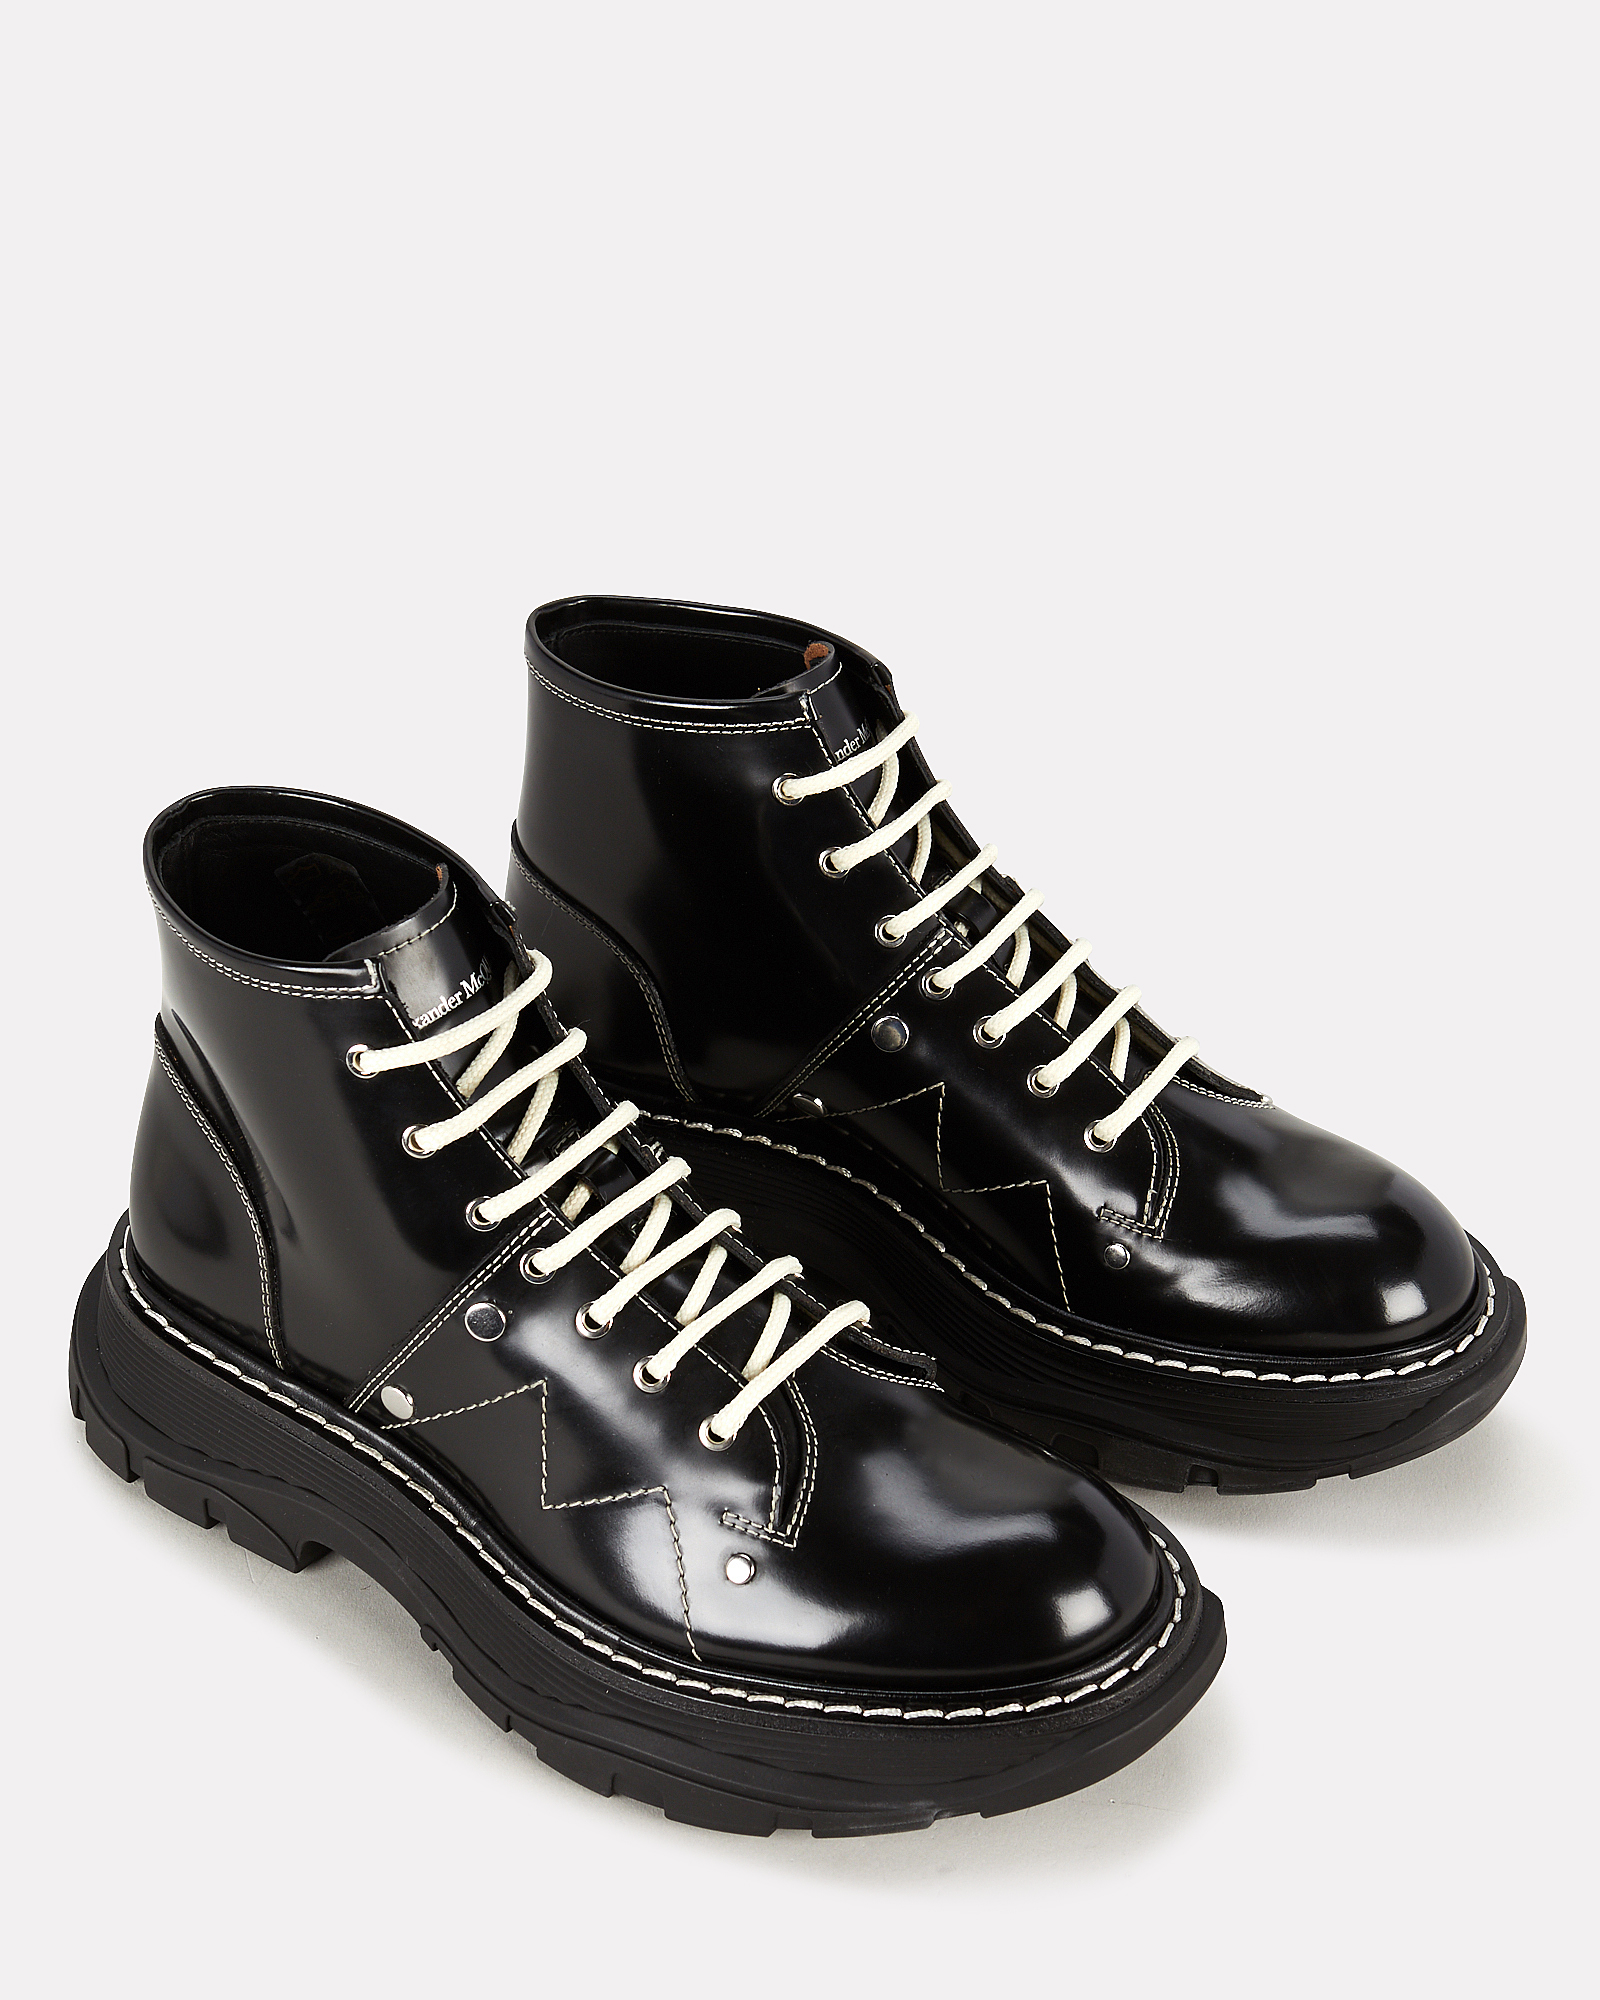 Alexander McQueen | Tread Lace-Up Leather Boots | INTERMIX®